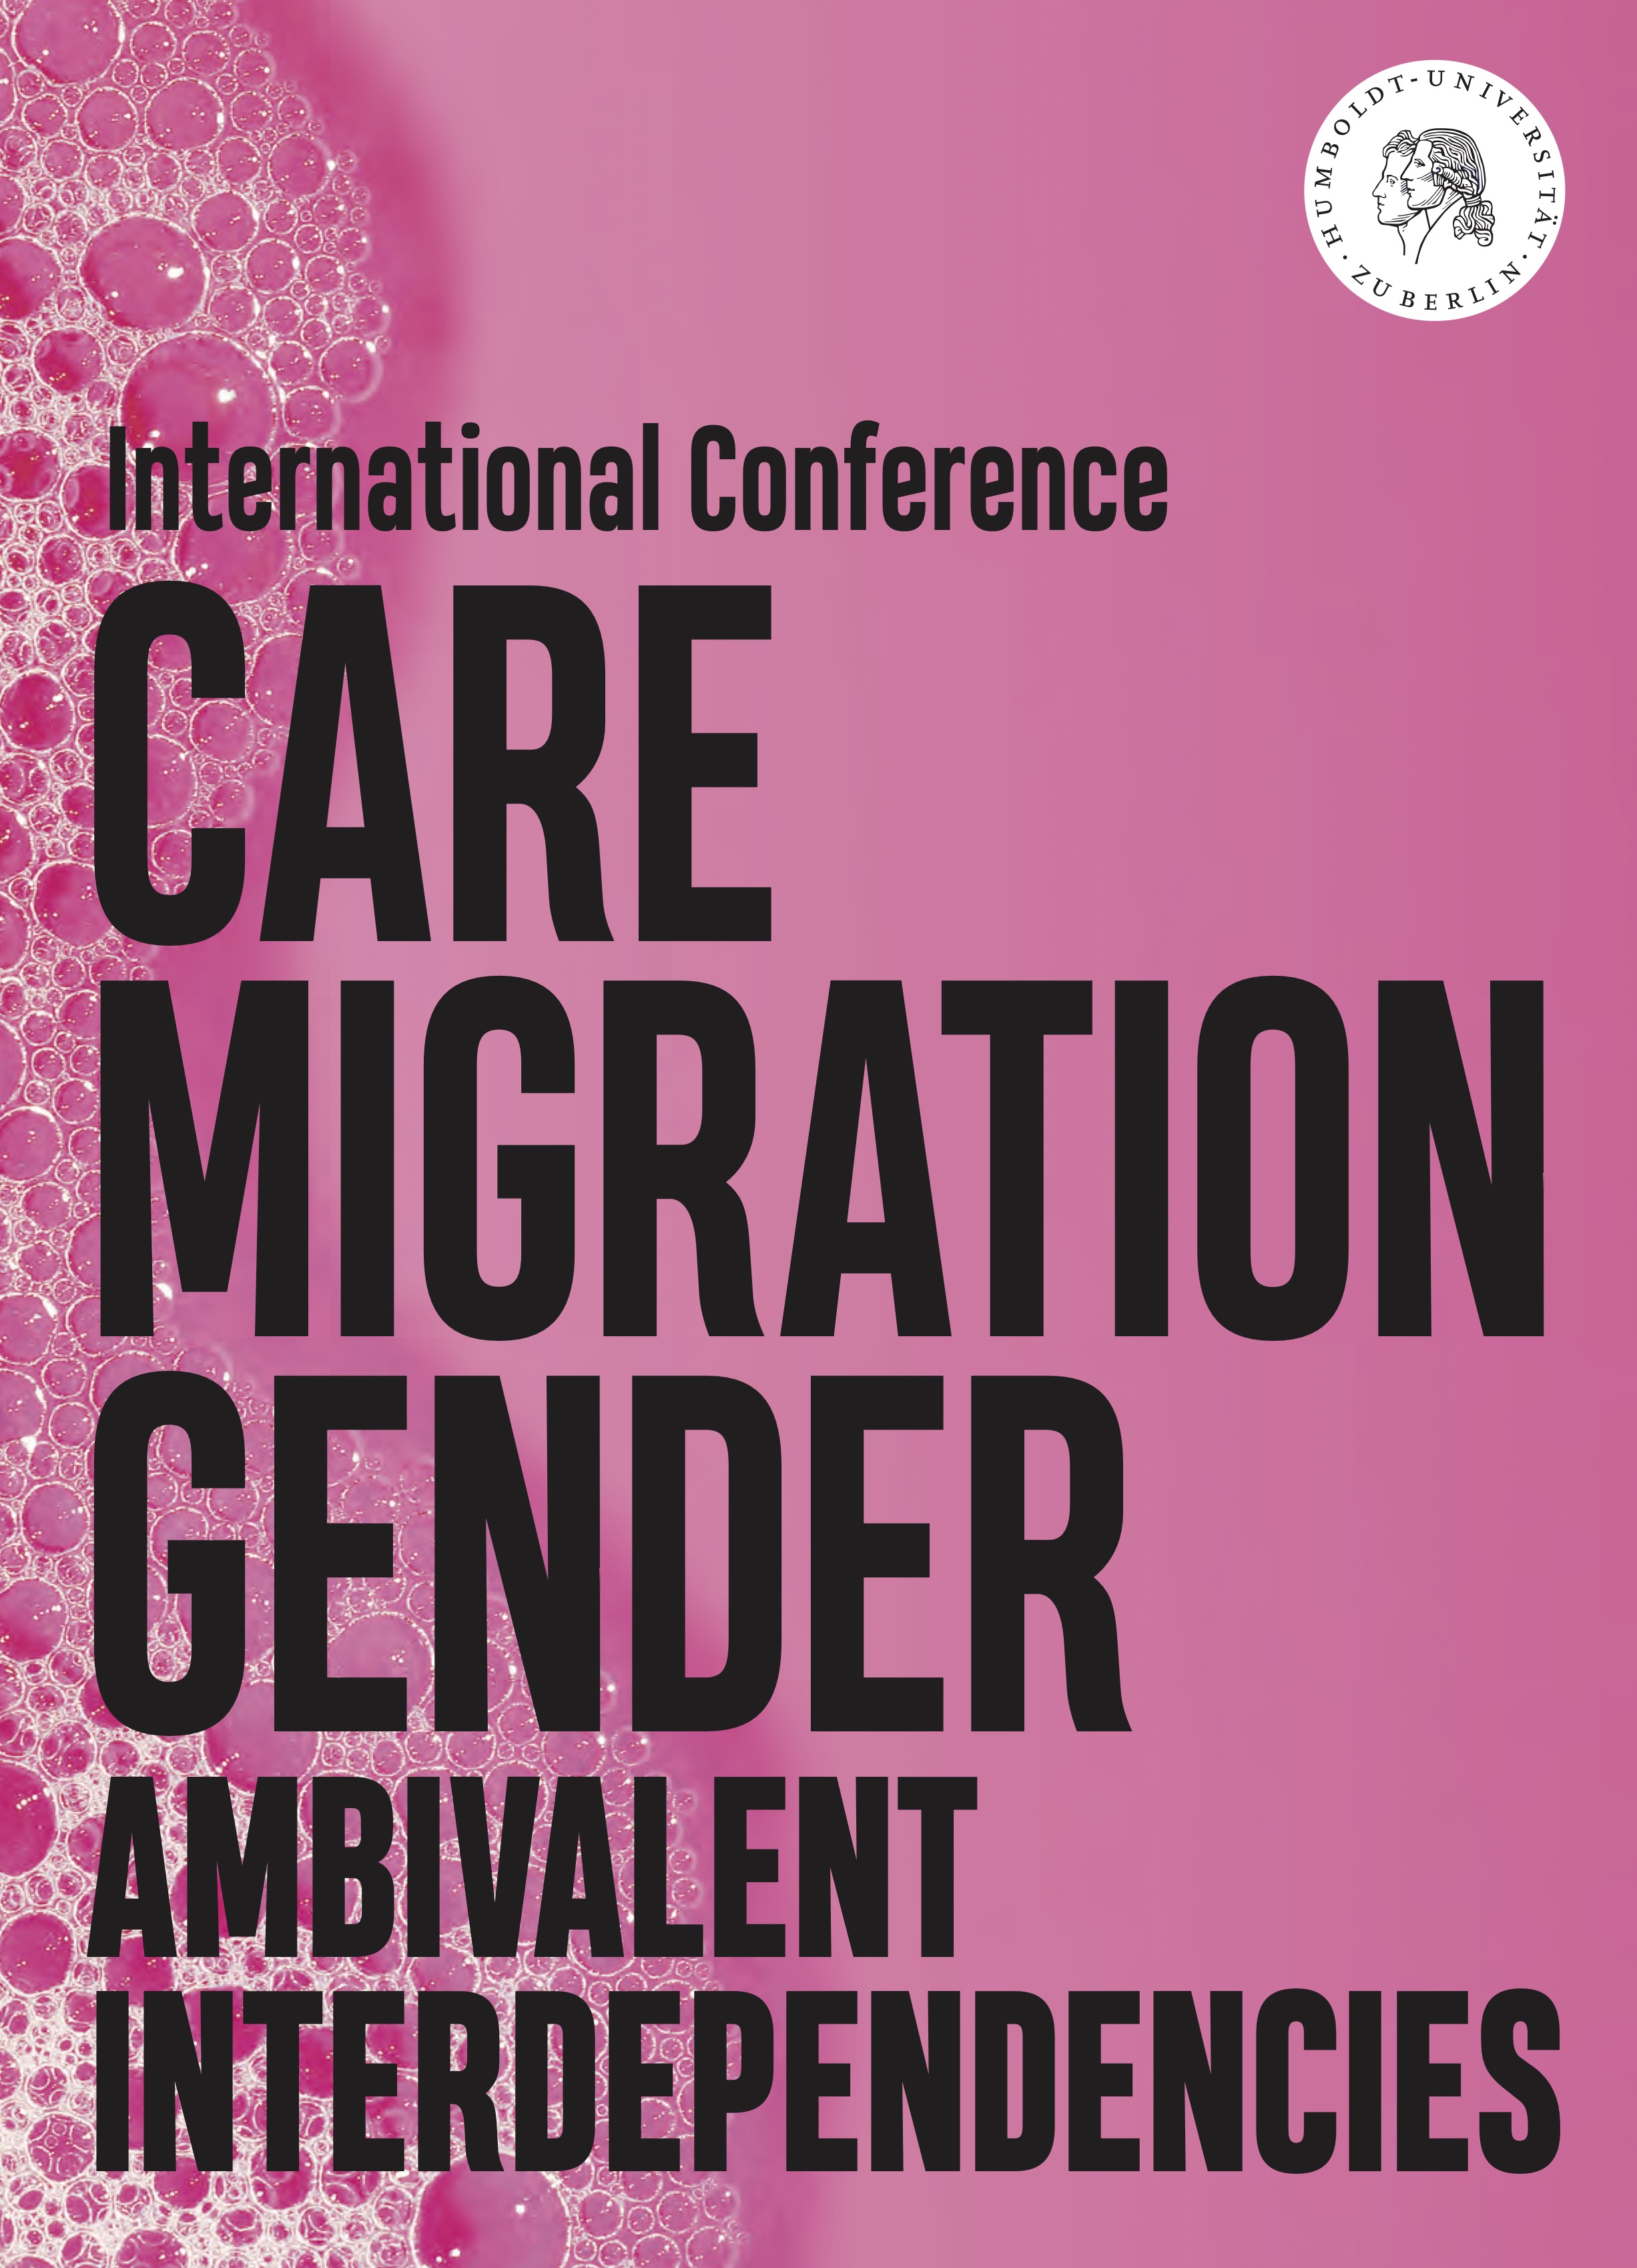 Conference Poster with Pink Background and soapy bubbles, Text: International Conference Care Migration Gender. Ambivalent Interdependencies